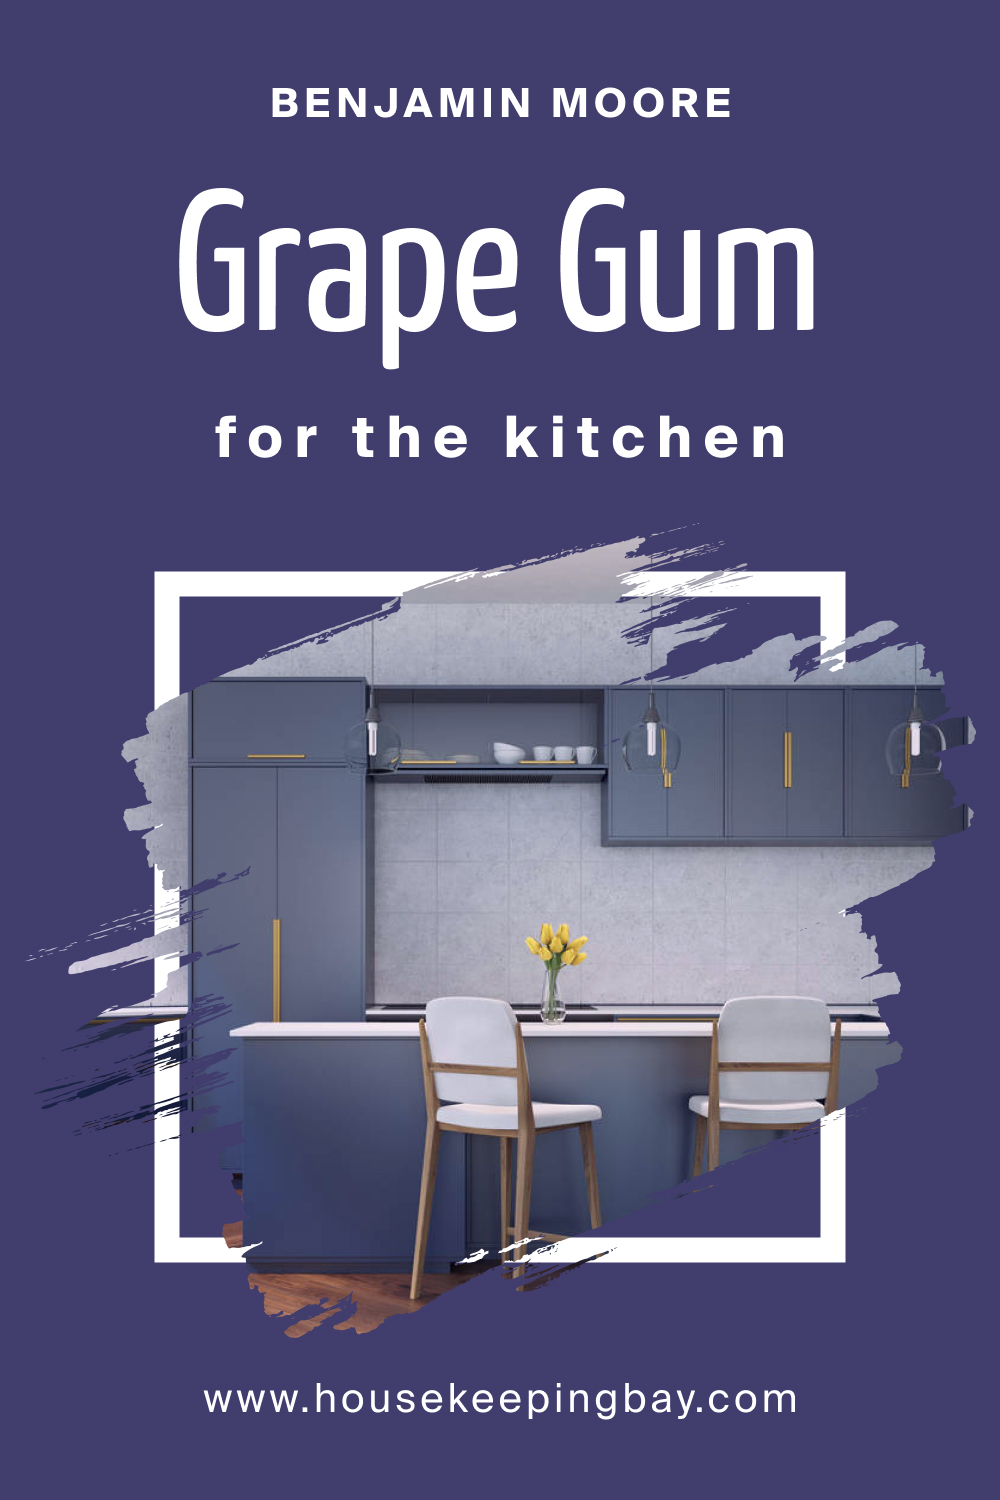 How to Use BM Grape Gum 2068-20 in the Kitchen?